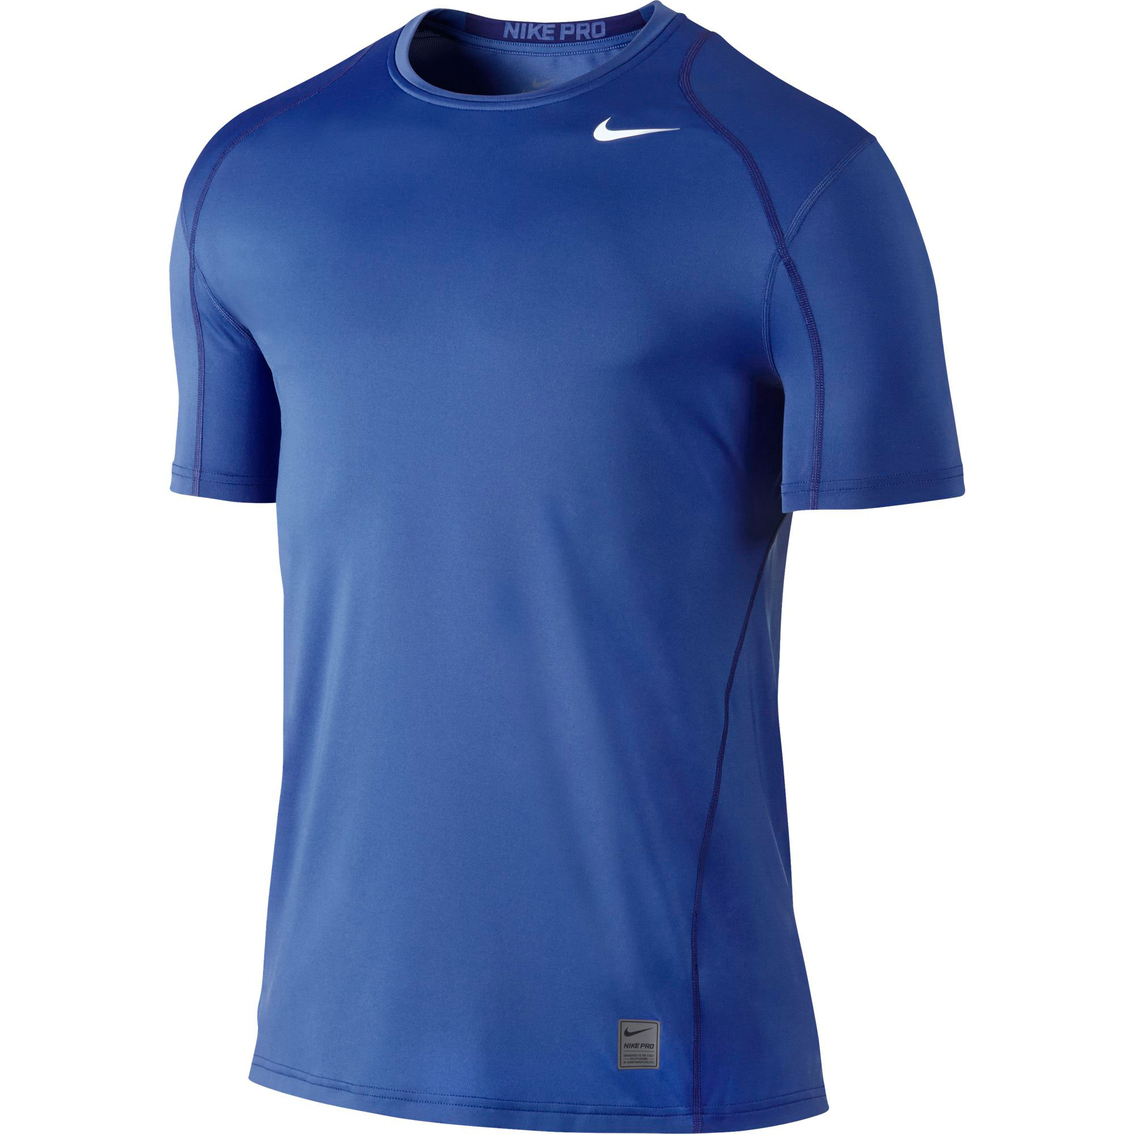 Nike Pro Cool Fitted Shirt | Shirts | Apparel | Shop The Exchange